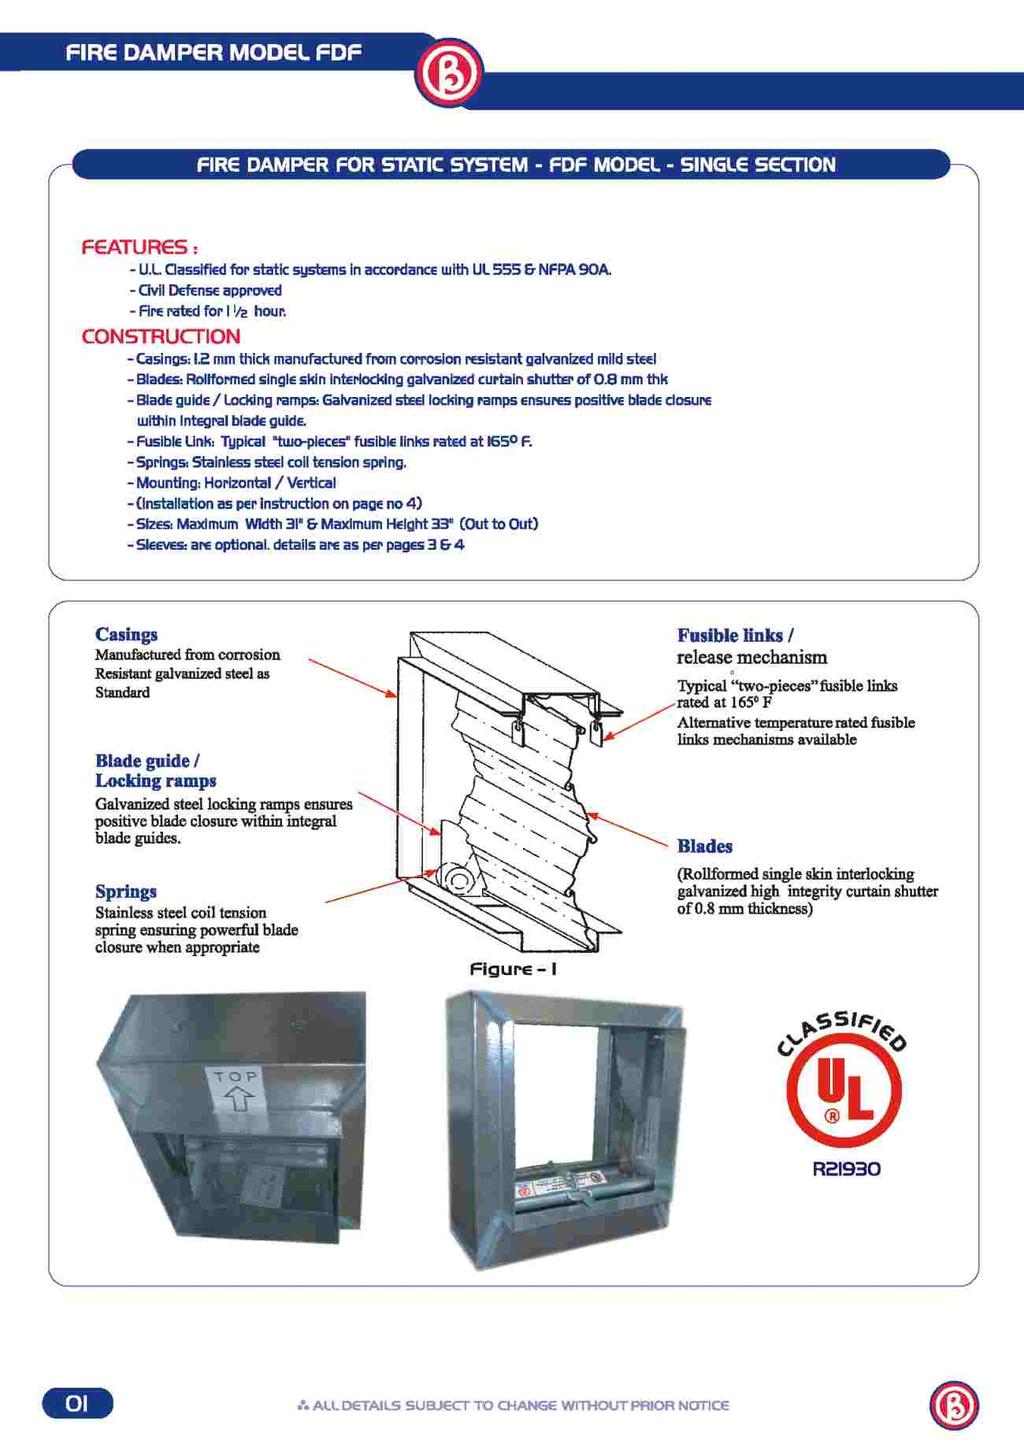 FIRE DAMPER MODEL FDF FIRE DAMPER FOR STATIC SYSTEM - FDF MODEL - SINGLE SECTION FEATURES: U.L. Classified for static system in accordance with UL 555 & NFPA 90A.